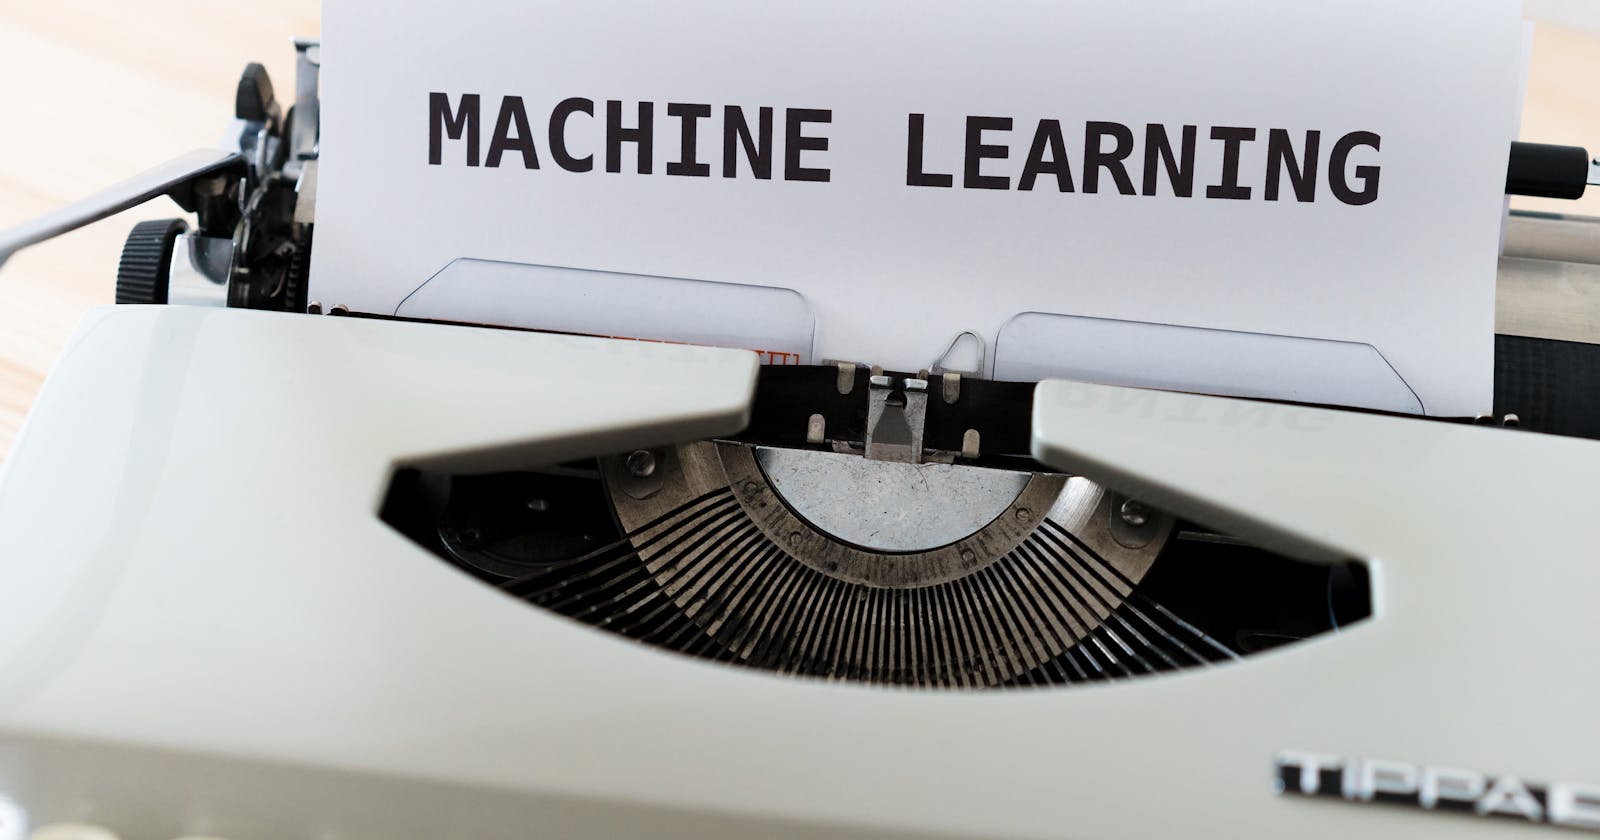 10 best Machine Learning Courses to Take (2023 Guide)